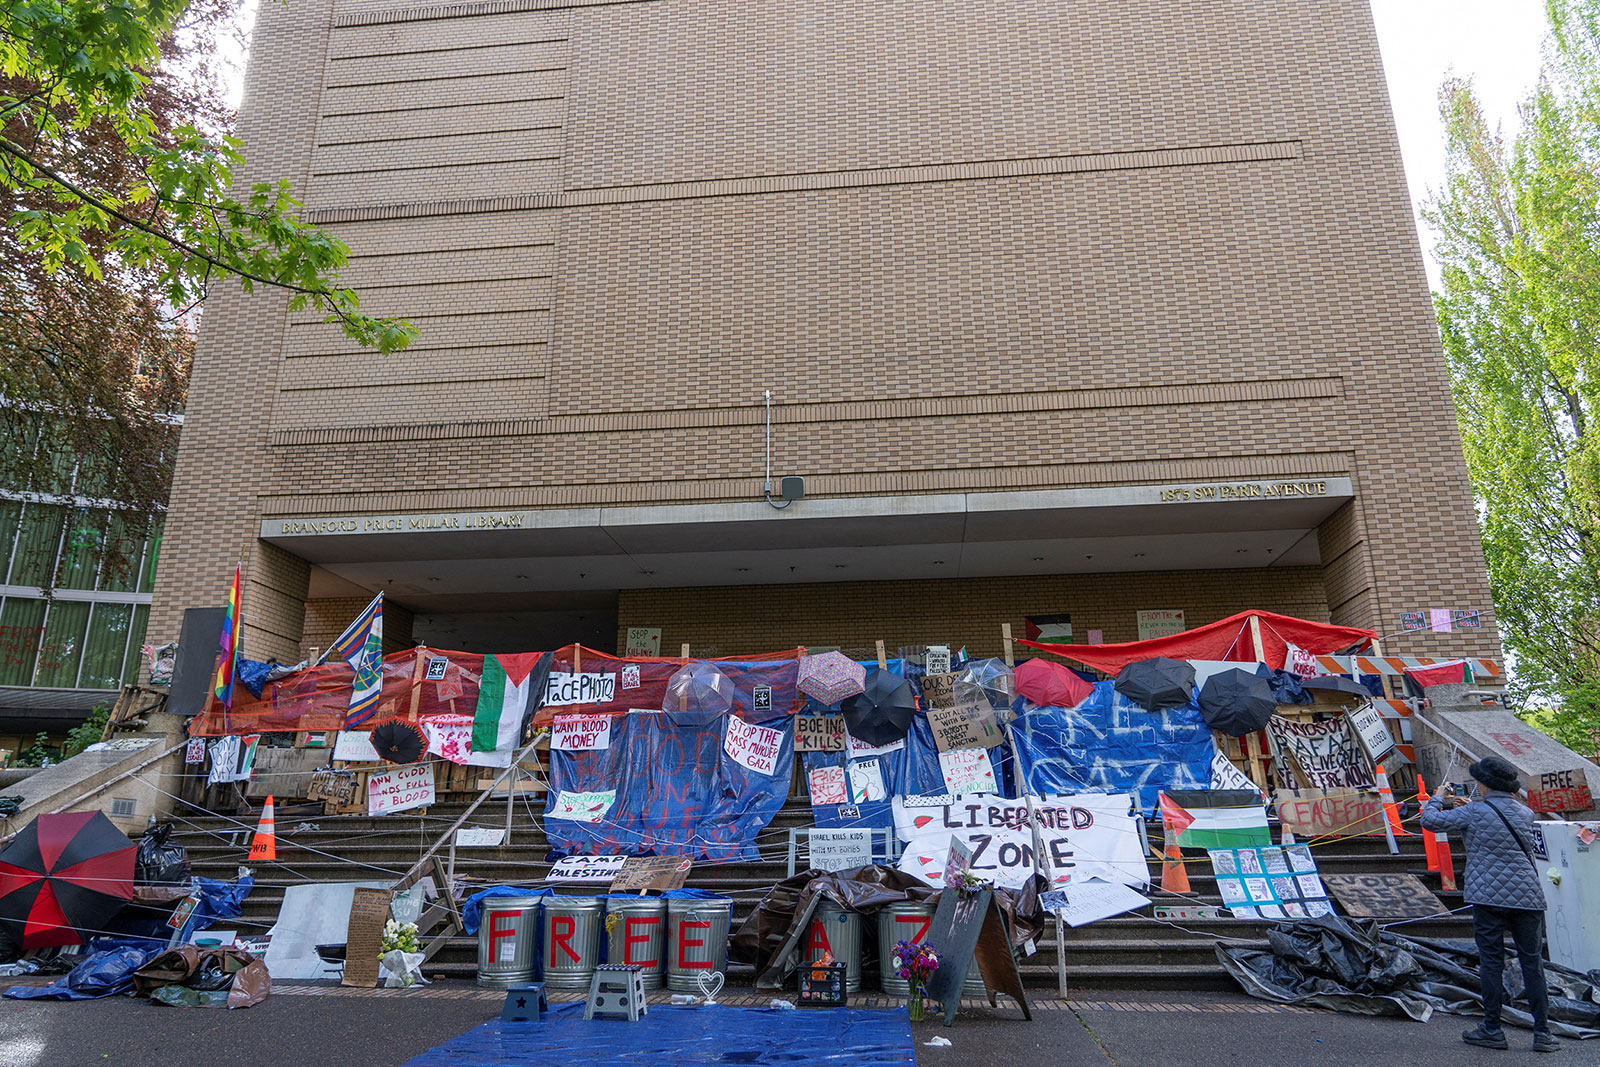 A view of  the barricaded Portland State University Library building in Portland, Oregon, as seen on Tuesday, April 30.